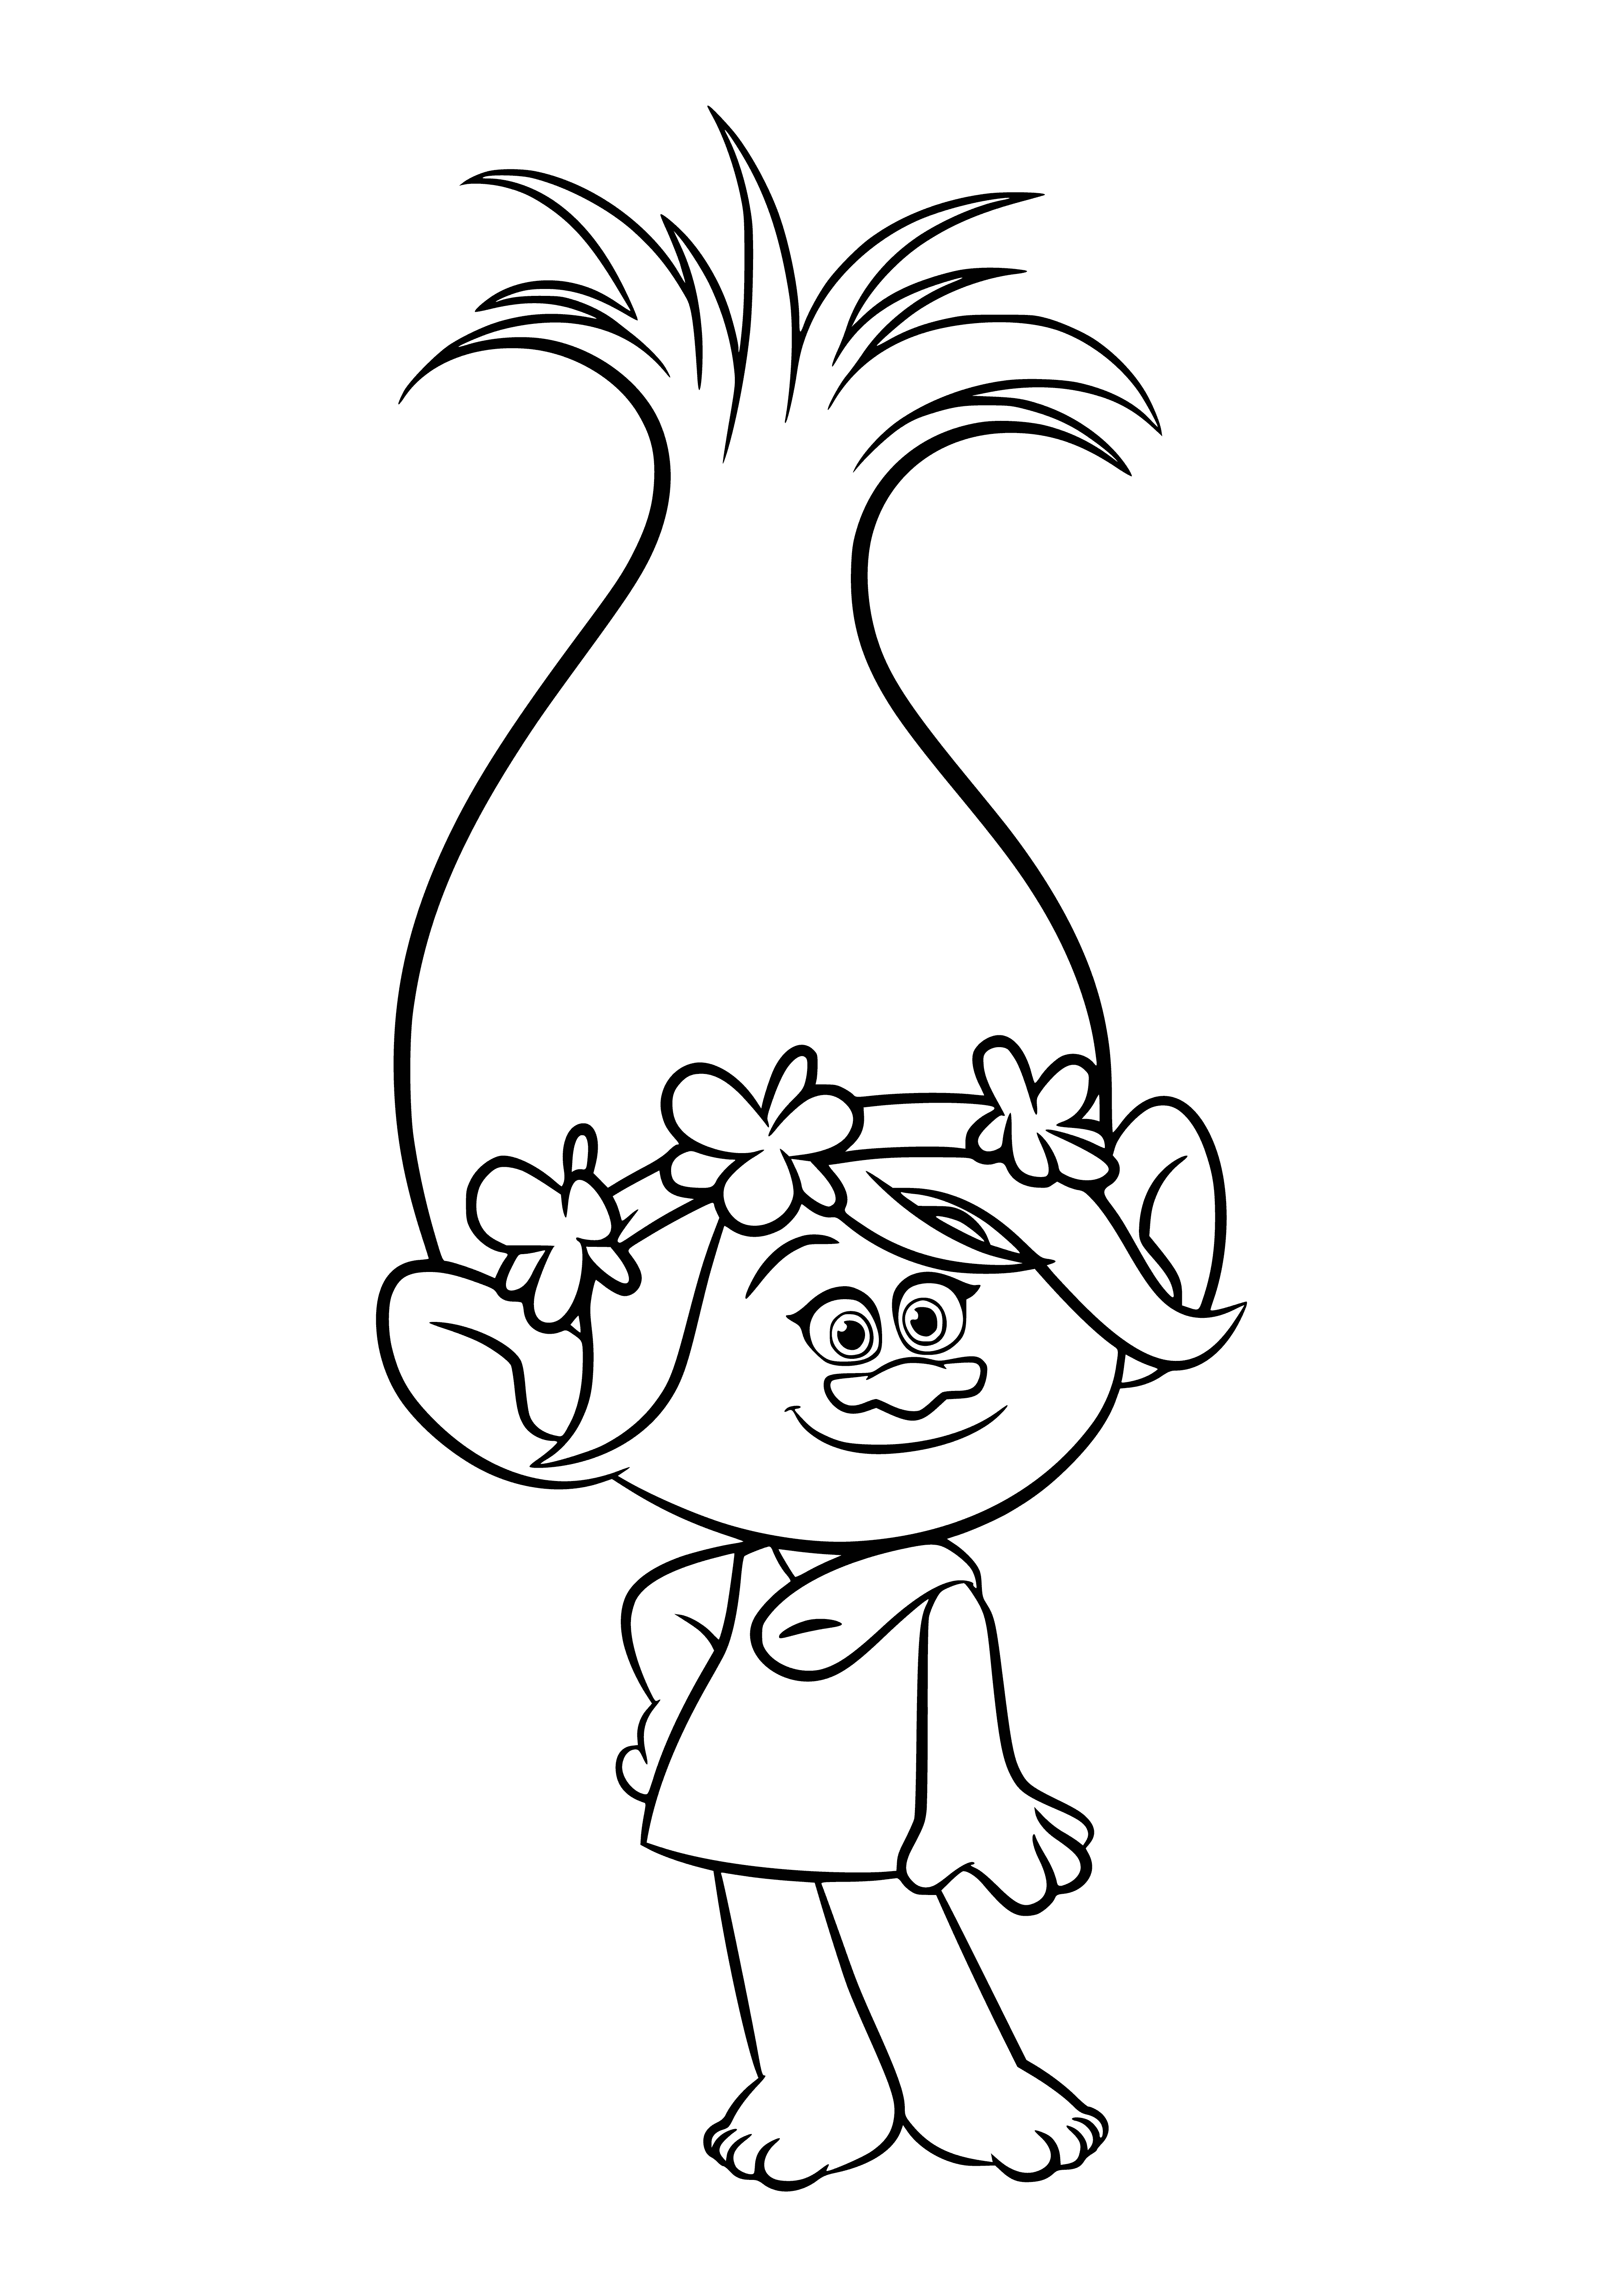 coloring page: Girl princess in pink dress & tiara holds wand , 2 trolls with diff. colors hold hands behind her. #PrincessStory